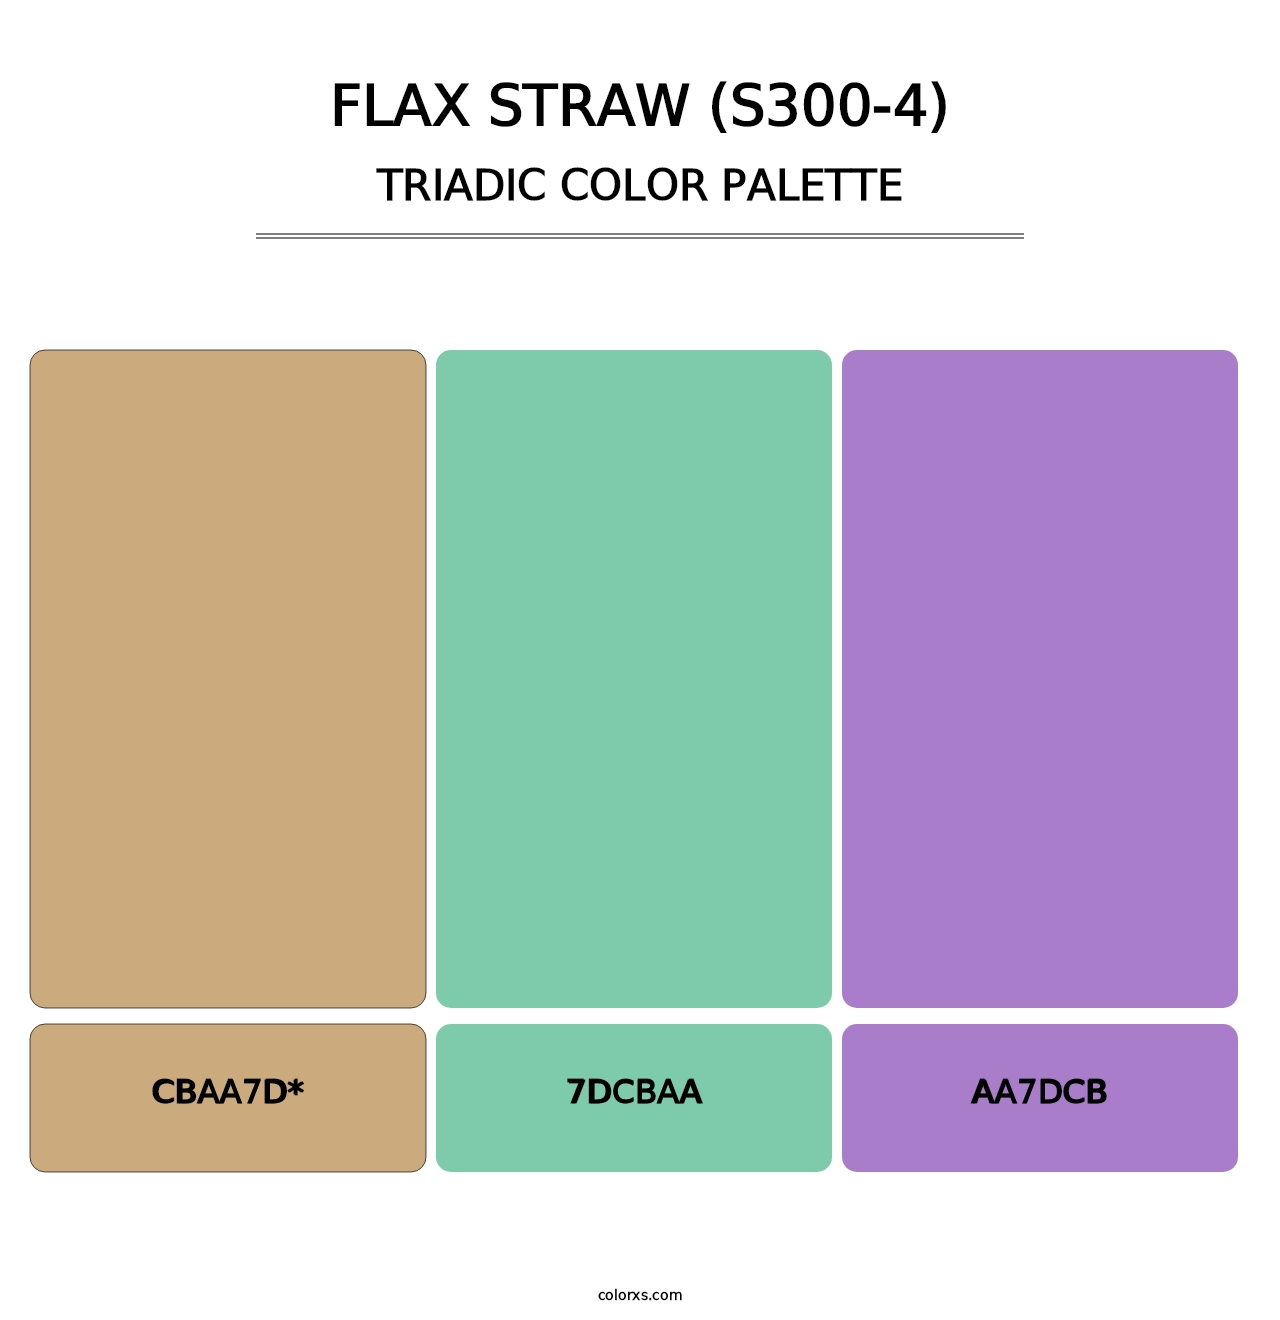 Flax Straw (S300-4) - Triadic Color Palette